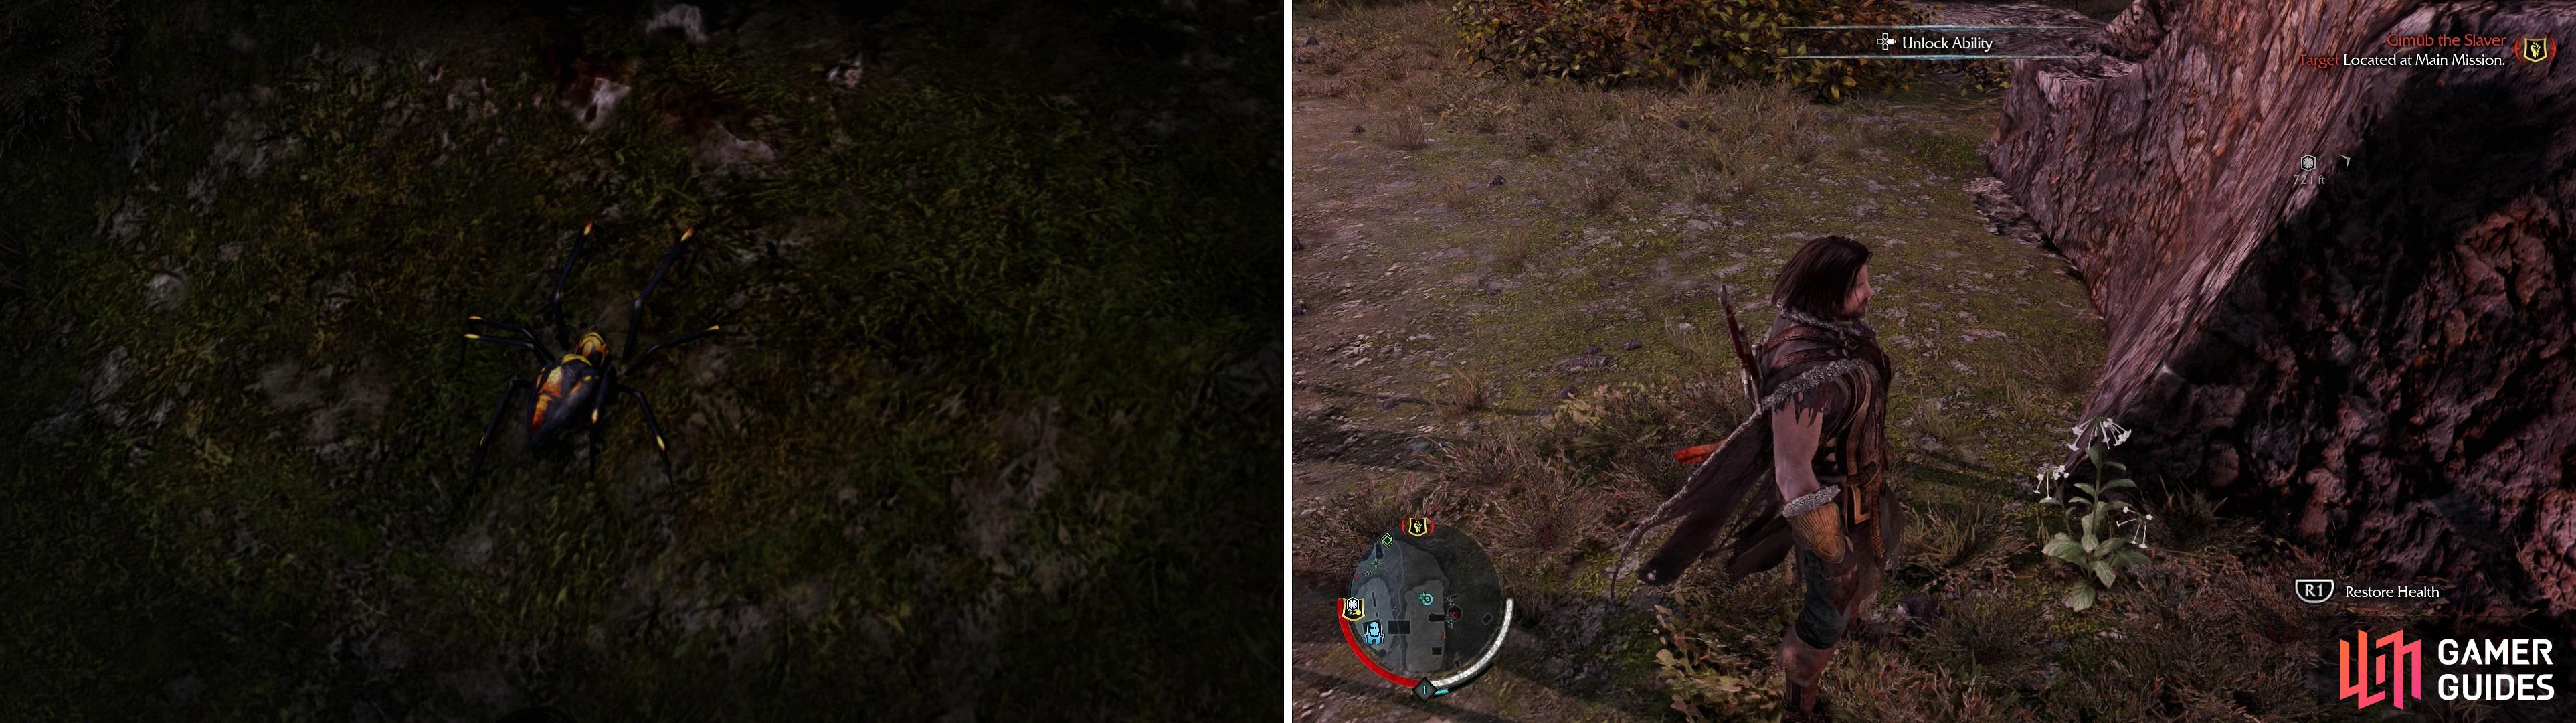 You can find various critters, like Spiders, throughout Mordor (left). Some are more dangerous than others, but killing most anything satisfies a Hunting Challenge at some point. Likewise there are herbs that can be gathered (right). Not only do they heal you fully, but collecting herbs will also complete Survival Challenges.